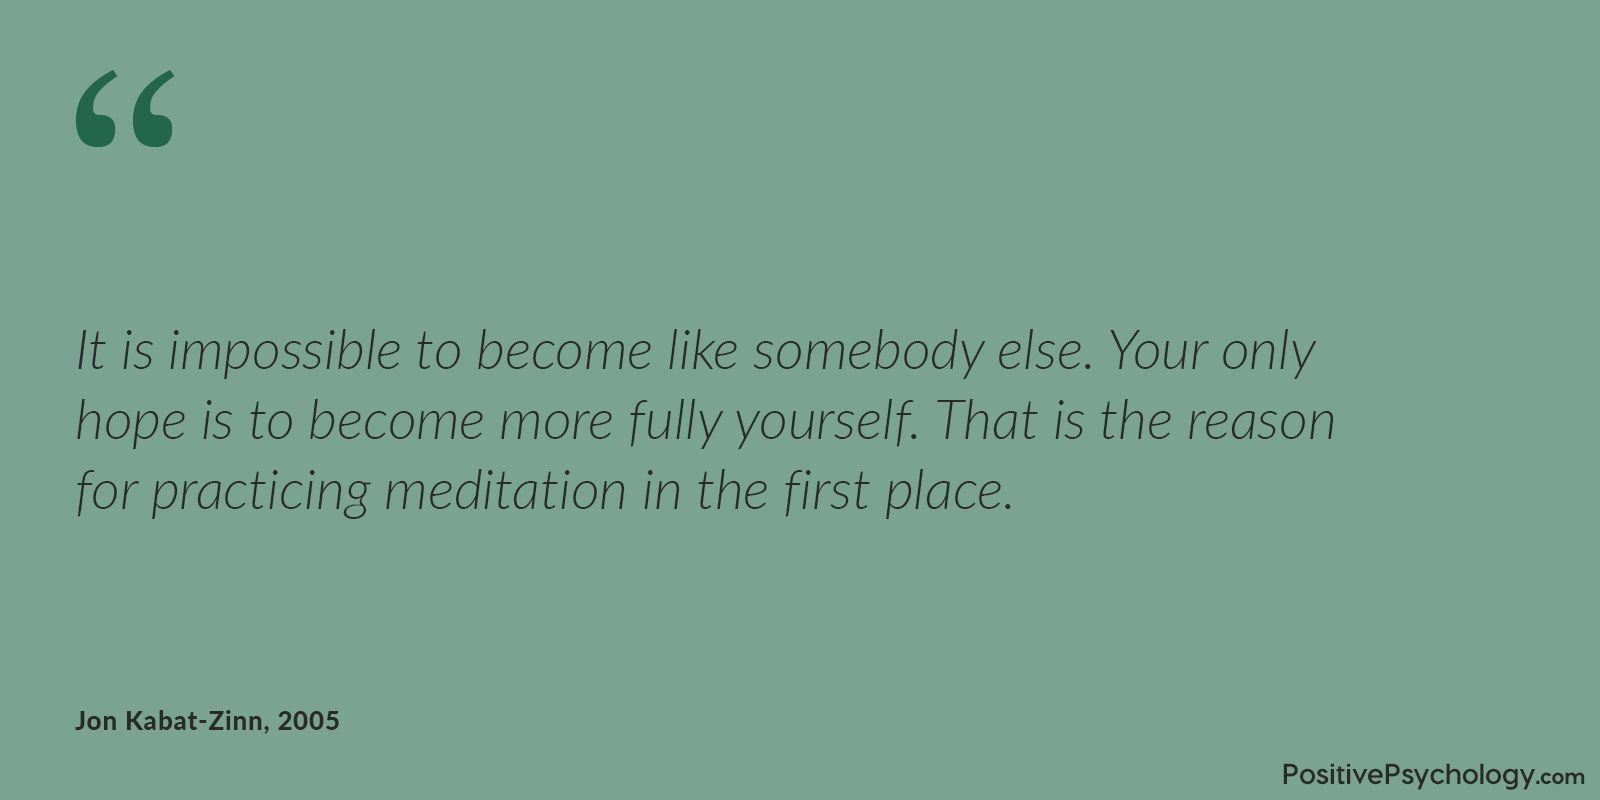 Become more fully yourself